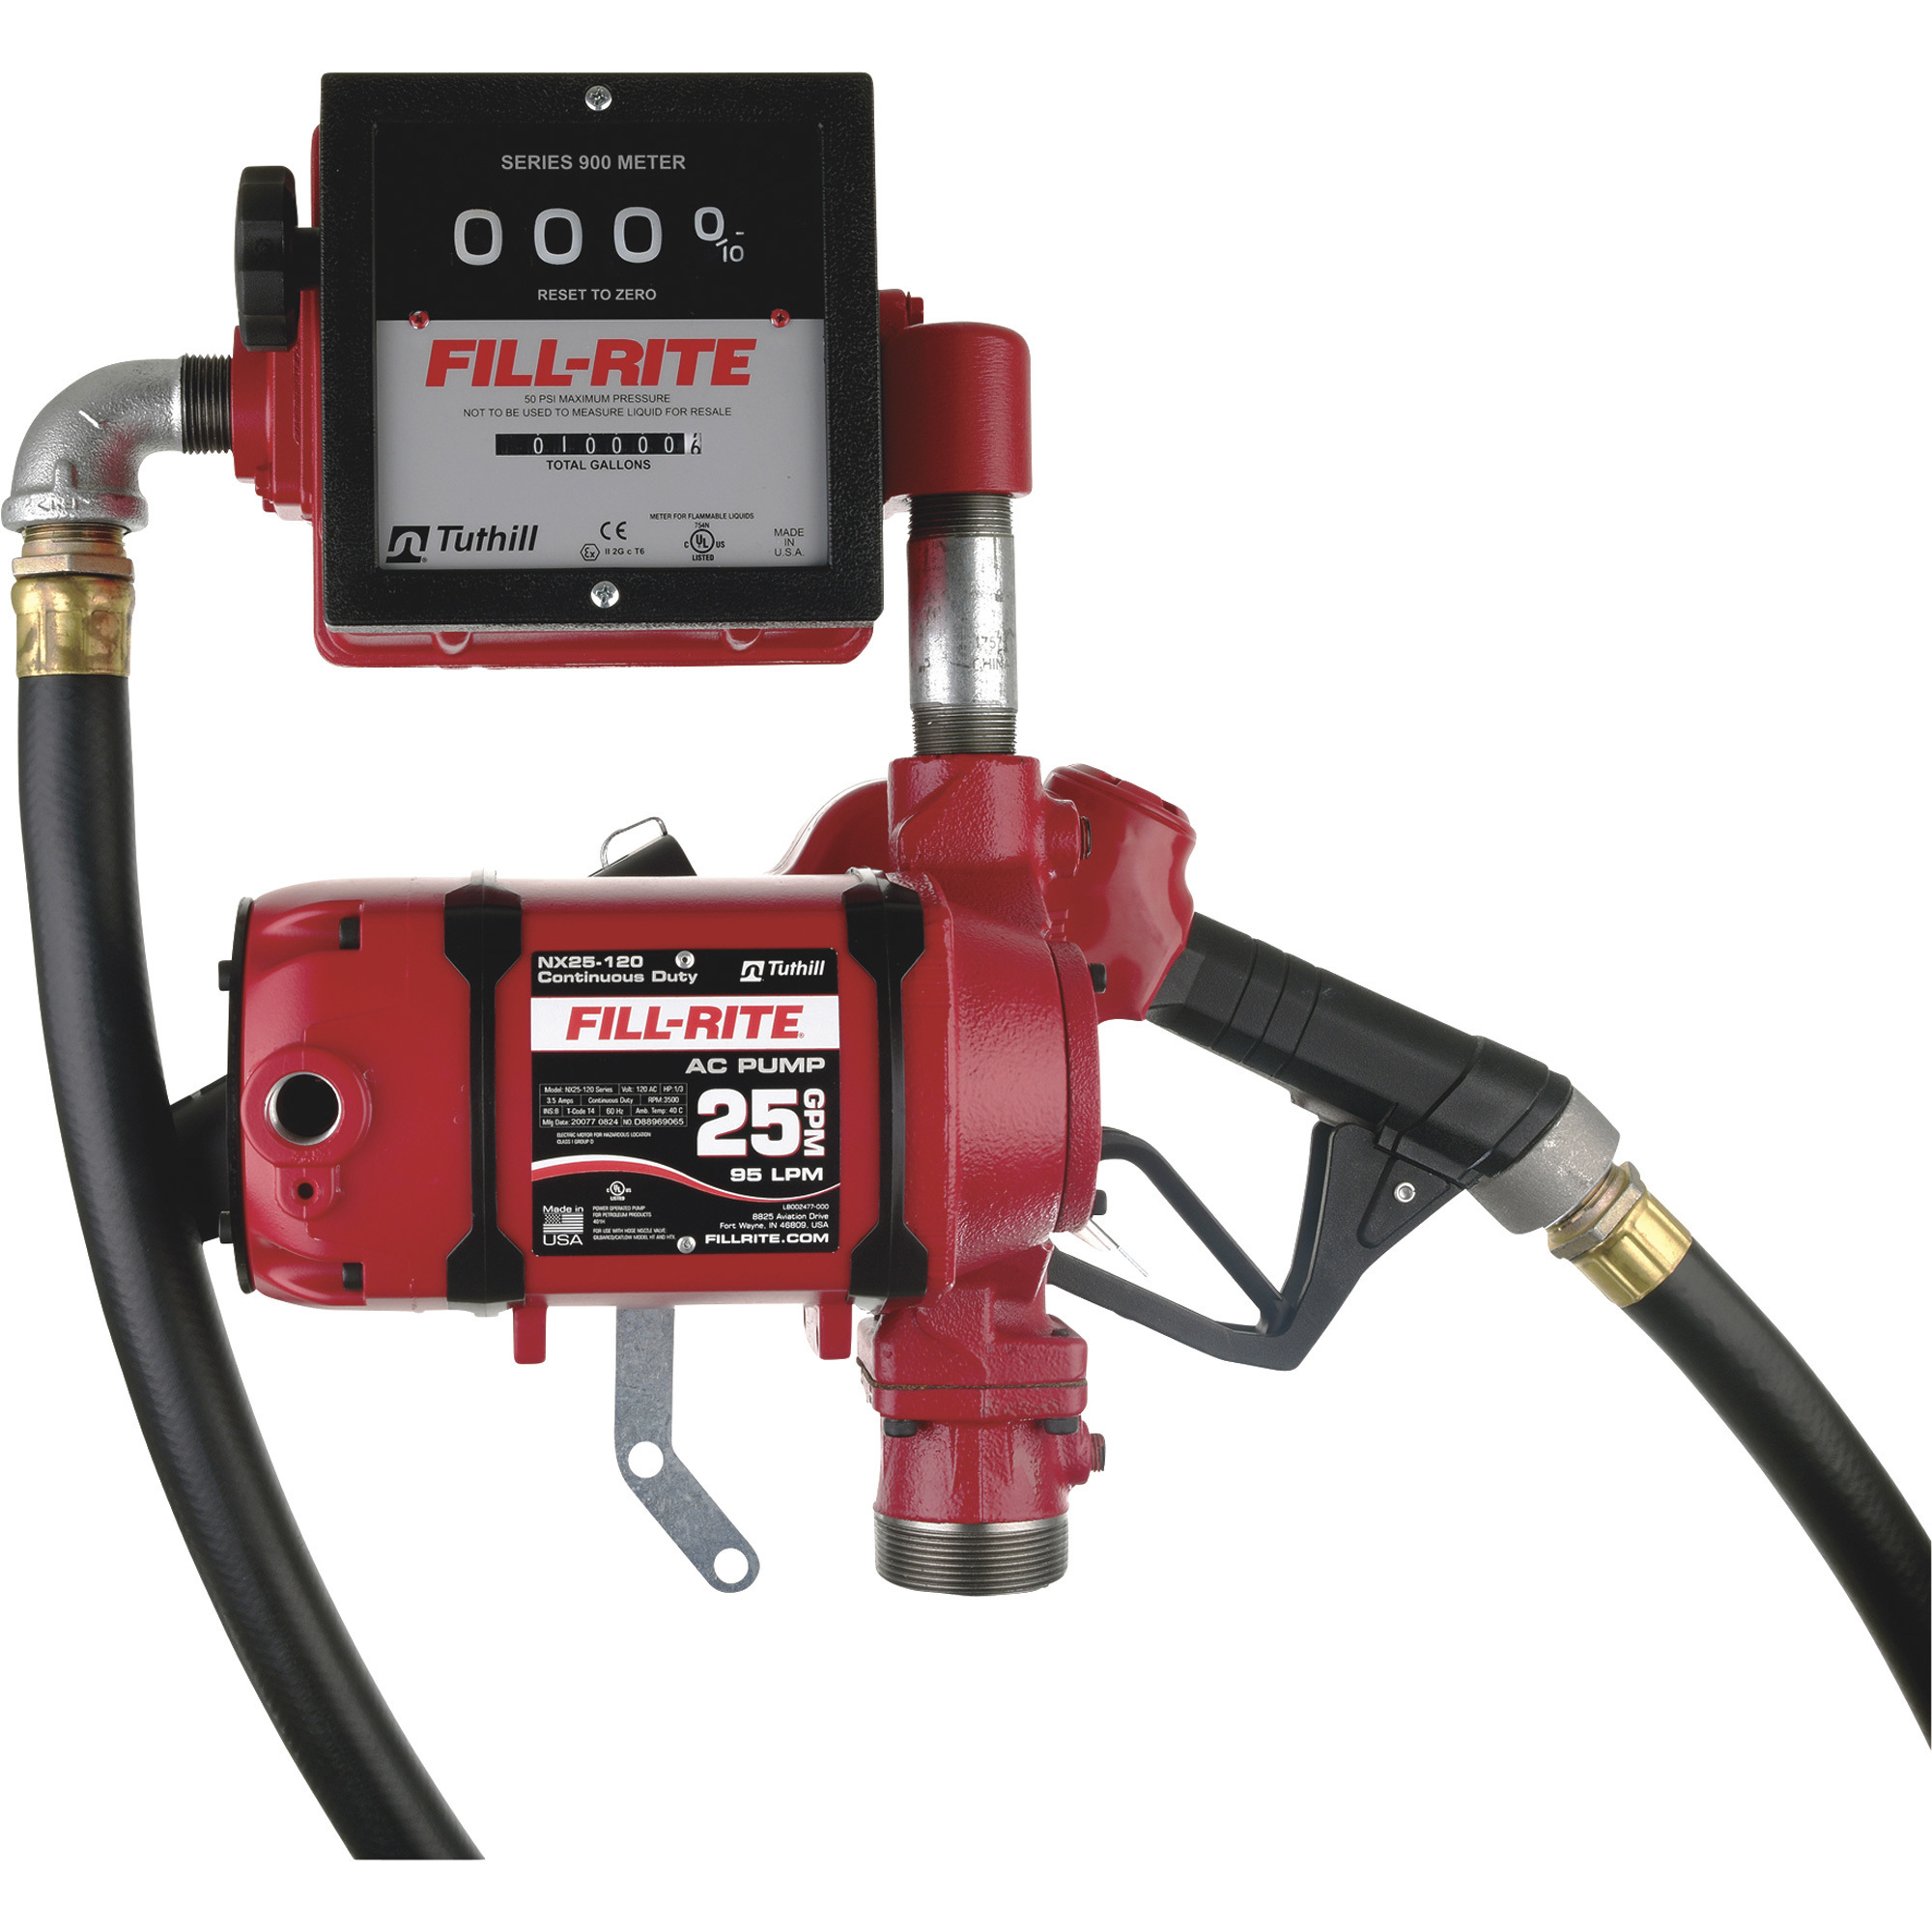 Fill-Rite 120V AC Ultra-High-Flow Fuel Transfer Pump with Automatic Nozzle and Hose â 25 GPM, Model NX25-120NB-AJ